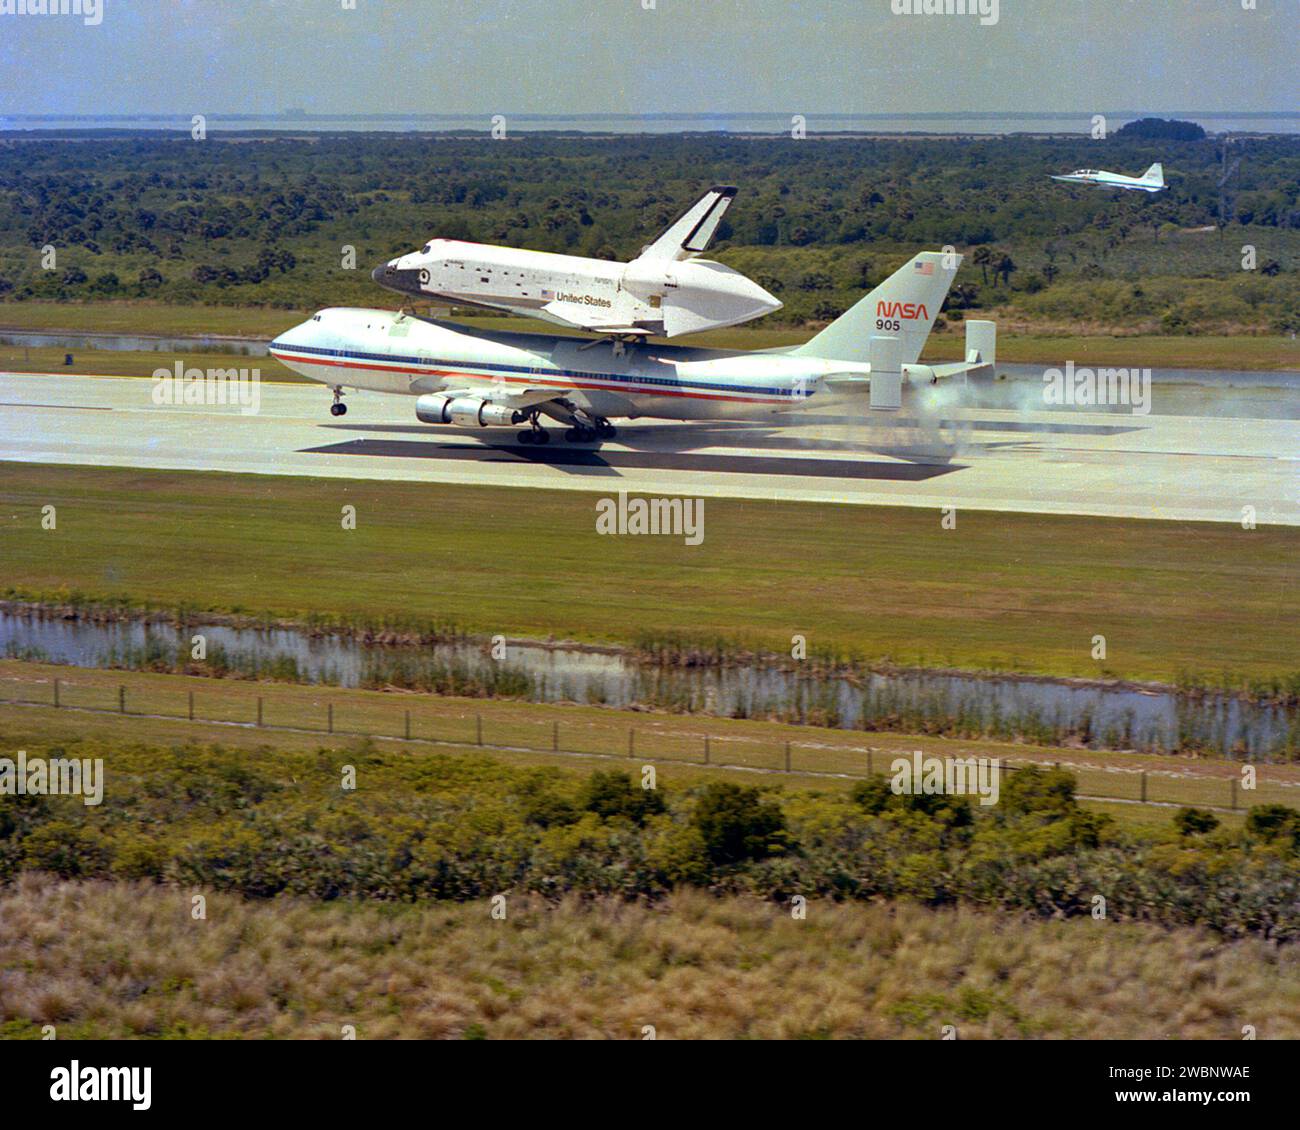 KENNEDY SPACE CENTER, FLA. - Shuttle orbiter Columbia aboard a 747 Shuttle Carrier Aircraft arrrives at KSC after the first successful space flight. Stock Photo